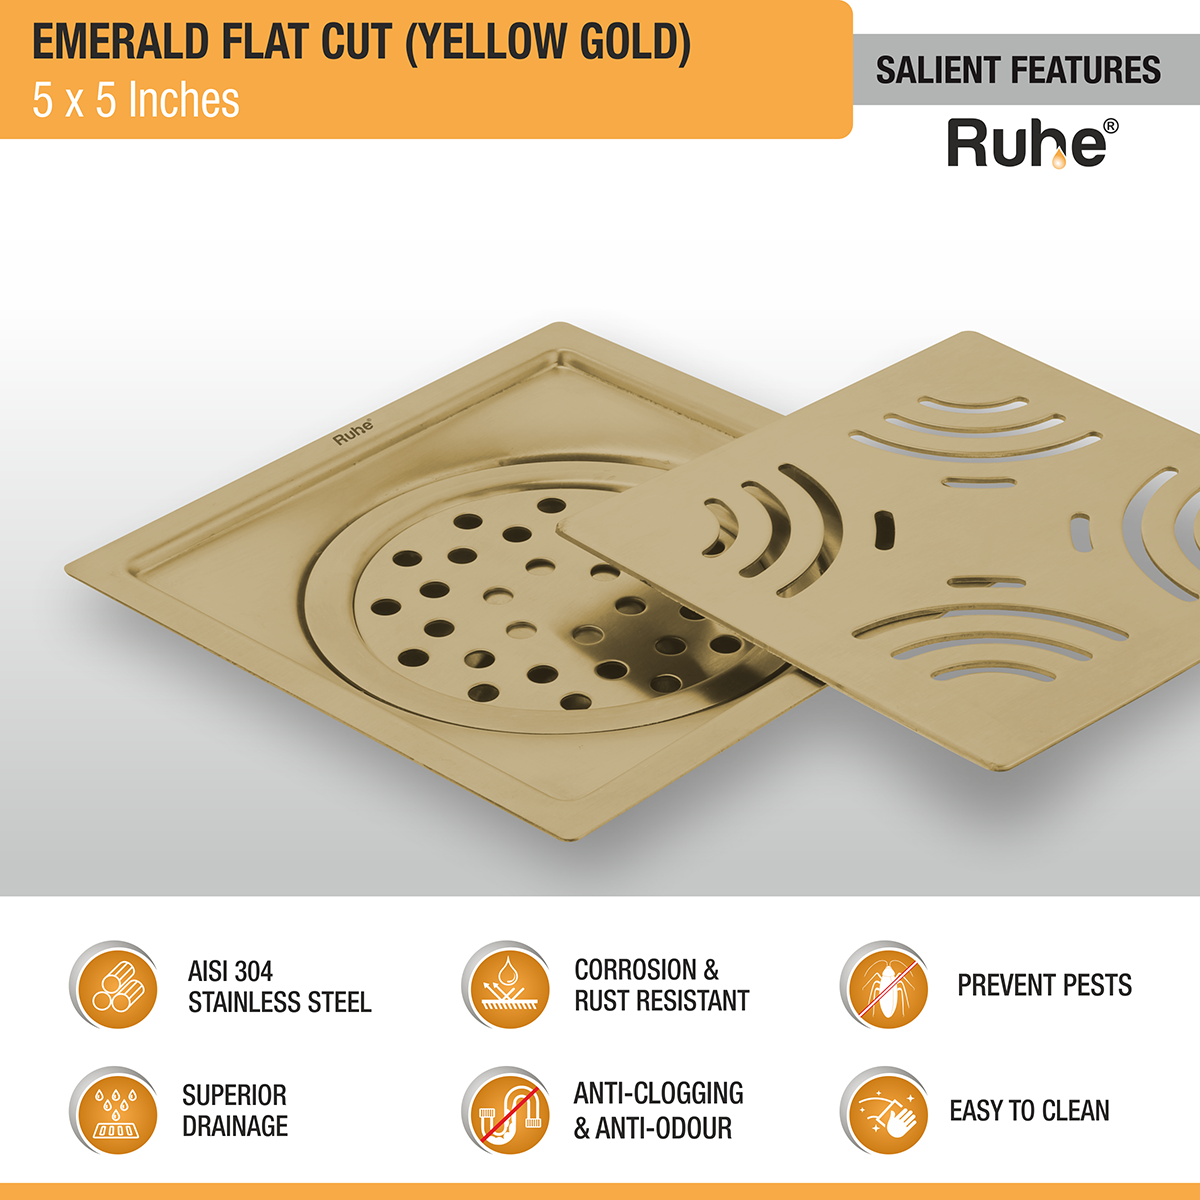 Emerald Square Flat Cut Floor Drain in Yellow Gold PVD Coating (5 x 5 Inches) features